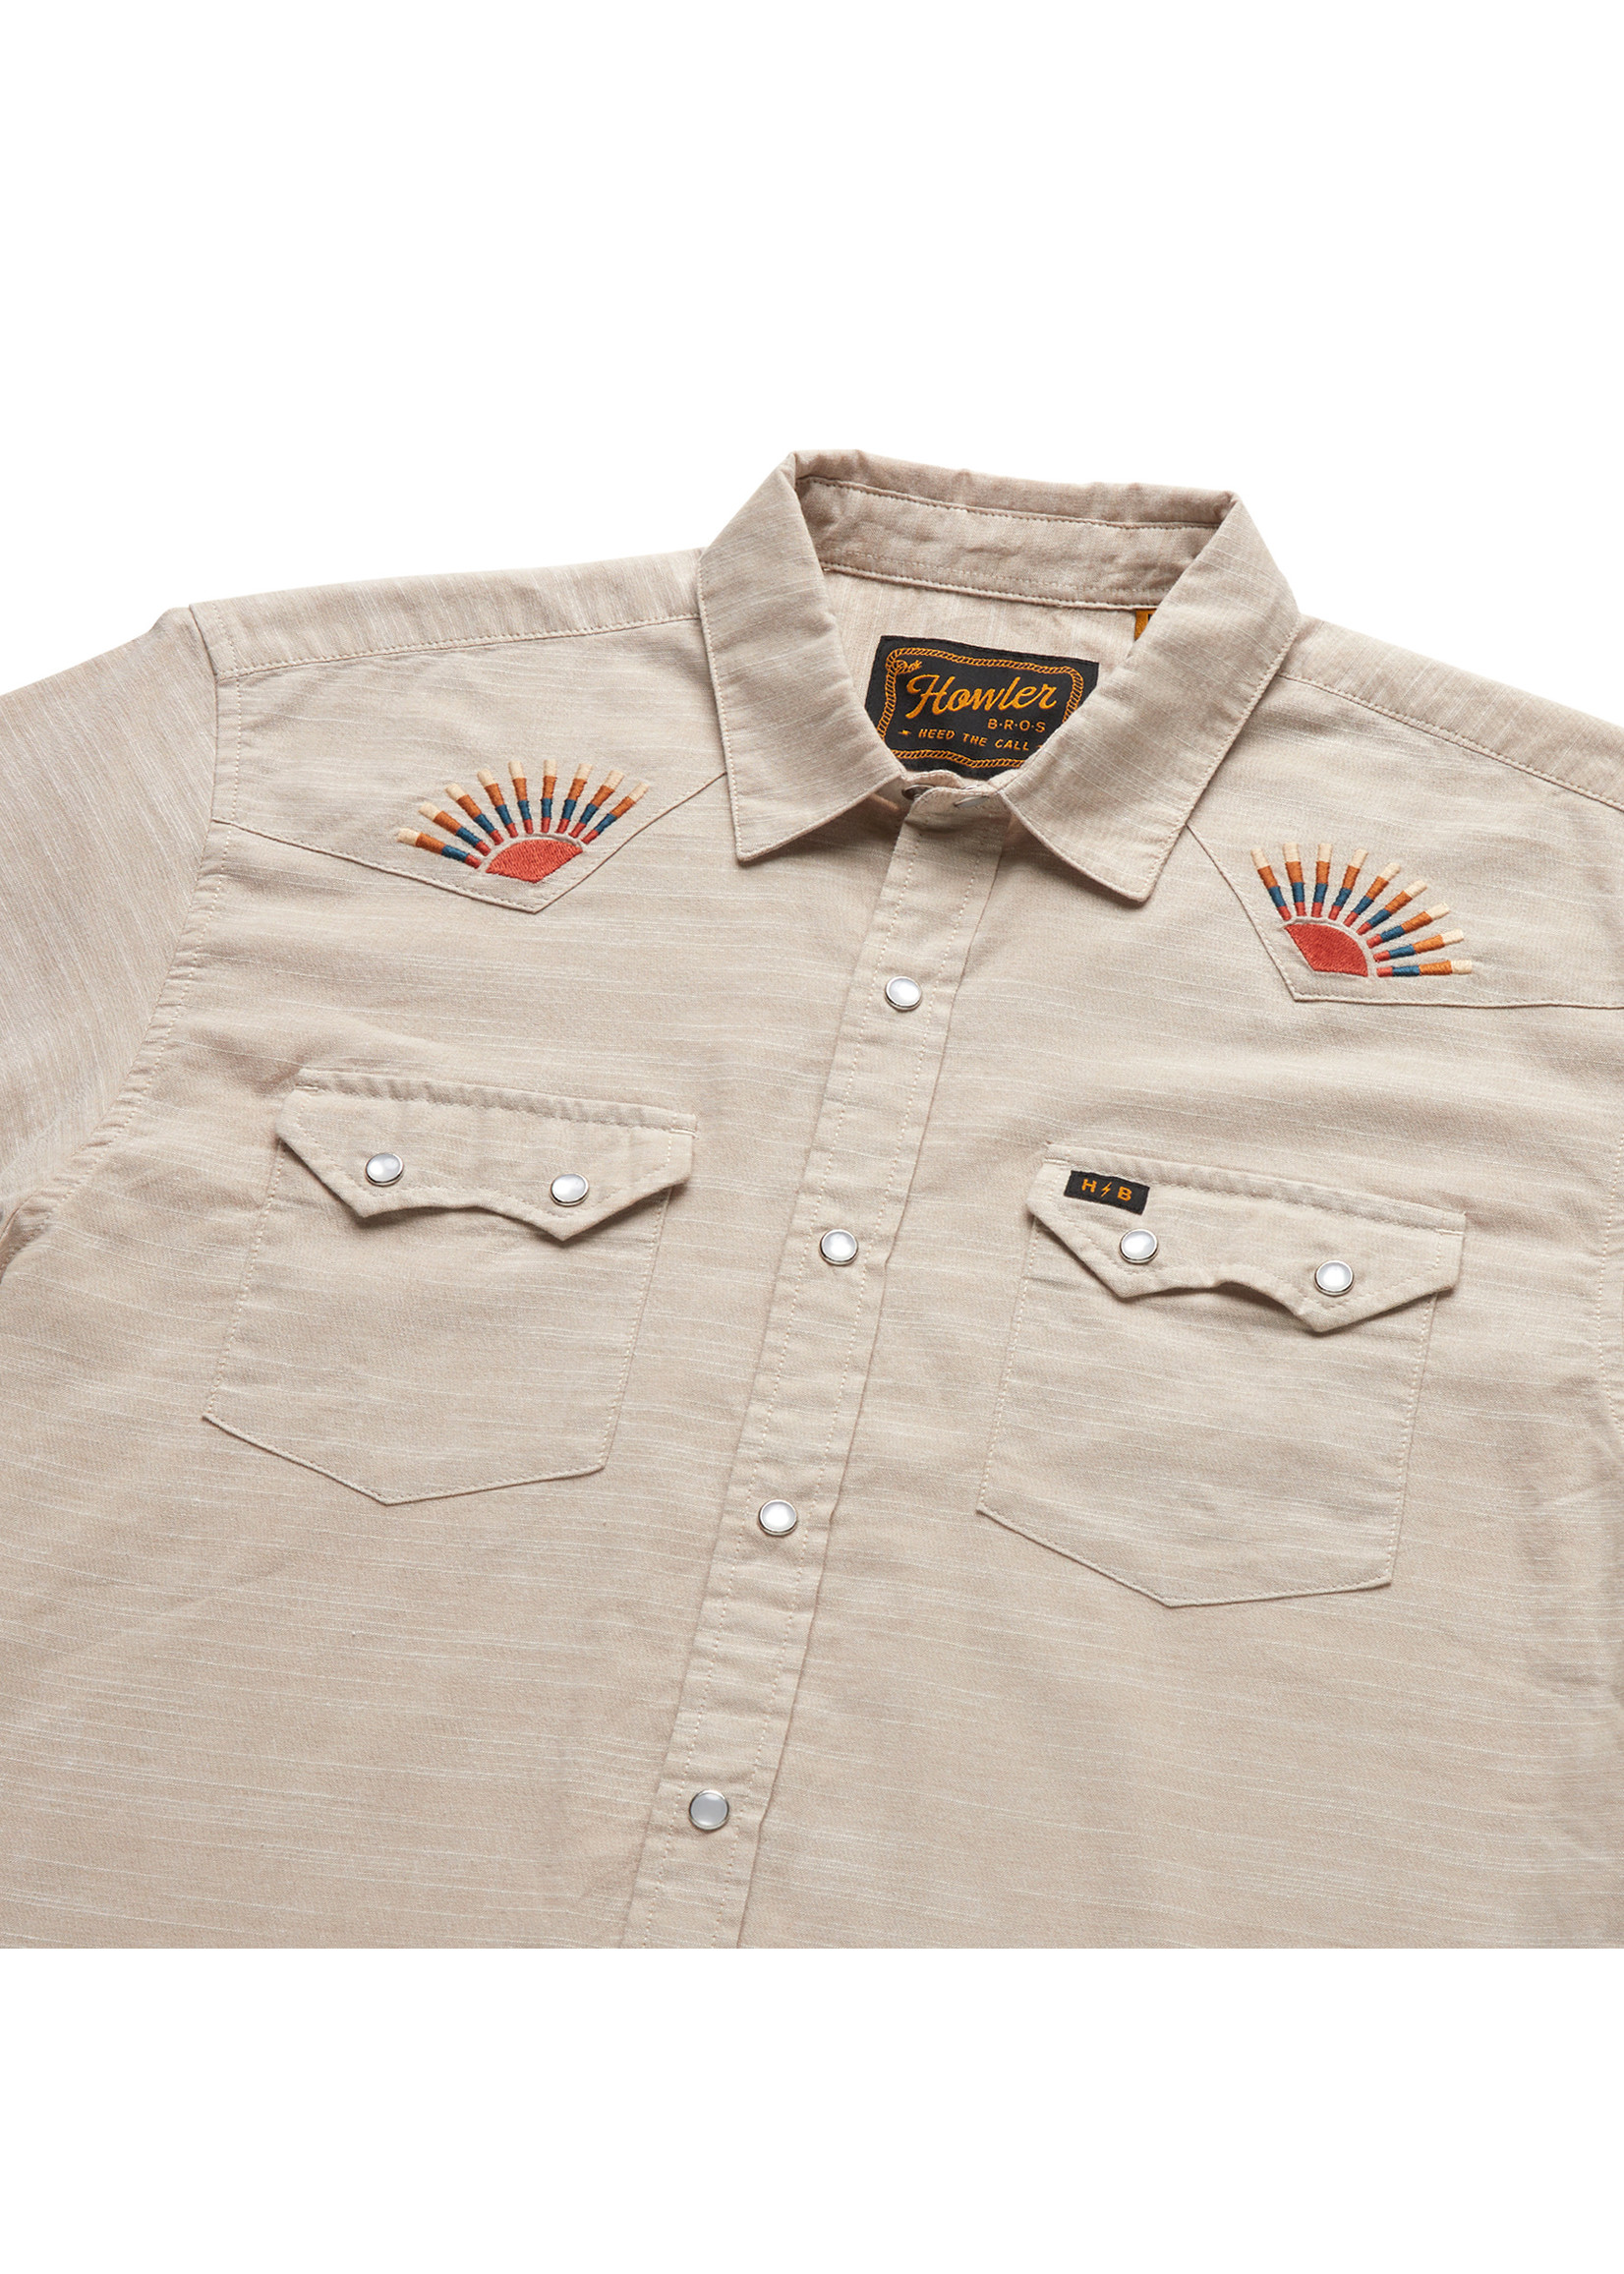 Howler Brothers Crosscut Deluxe S/S  Rising Suns